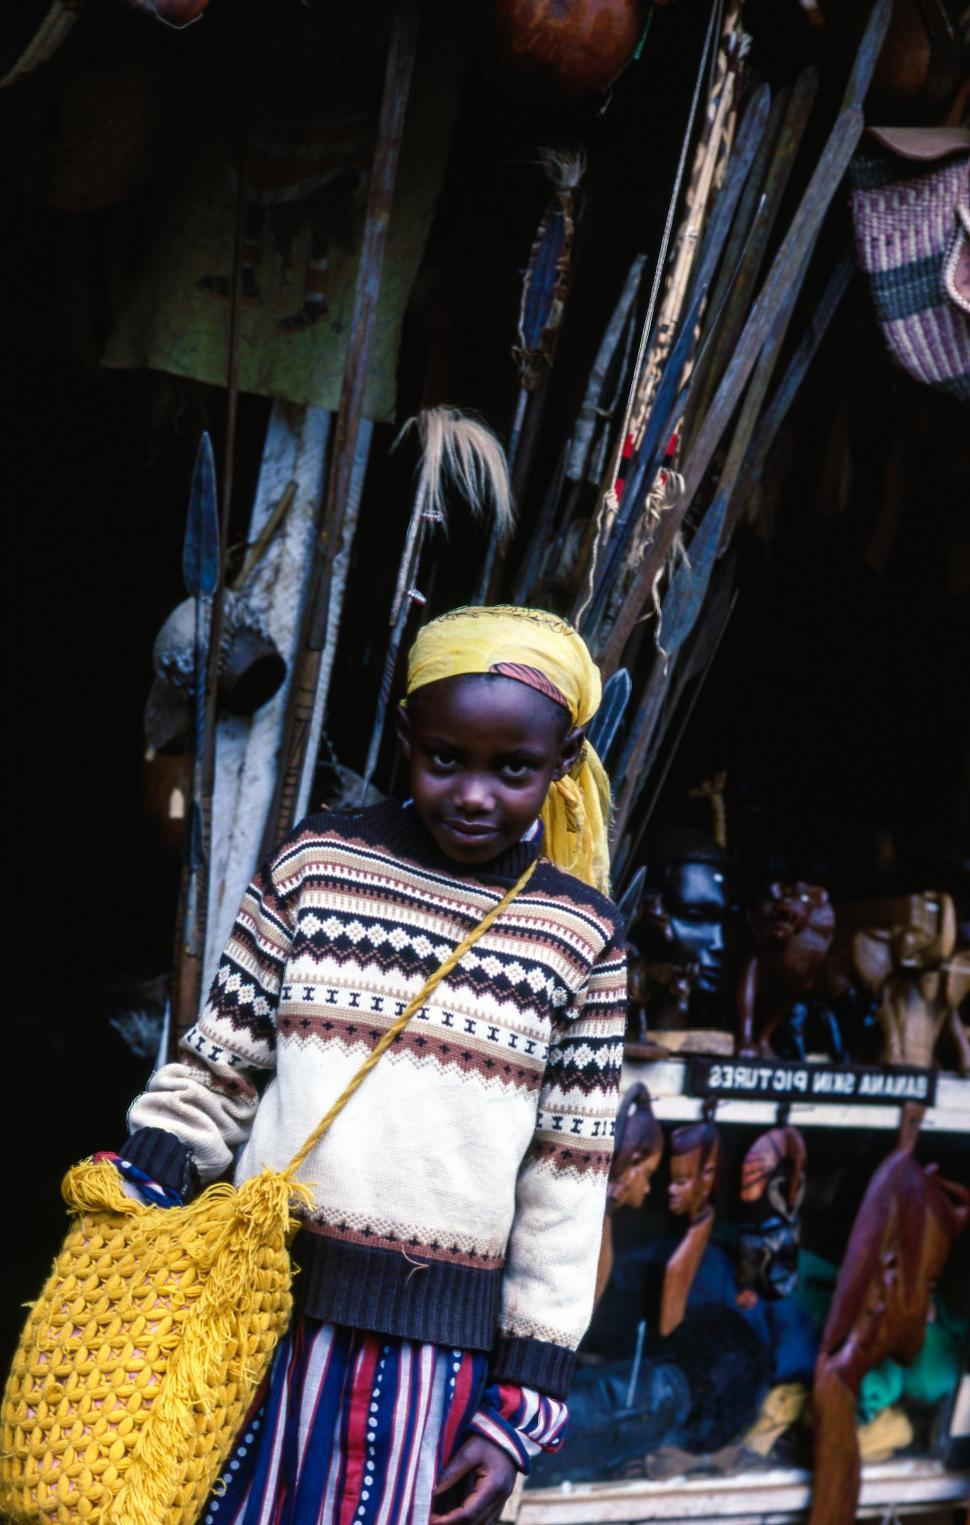 Free Image of Young Girl Carrying Yellow Bag in Market 